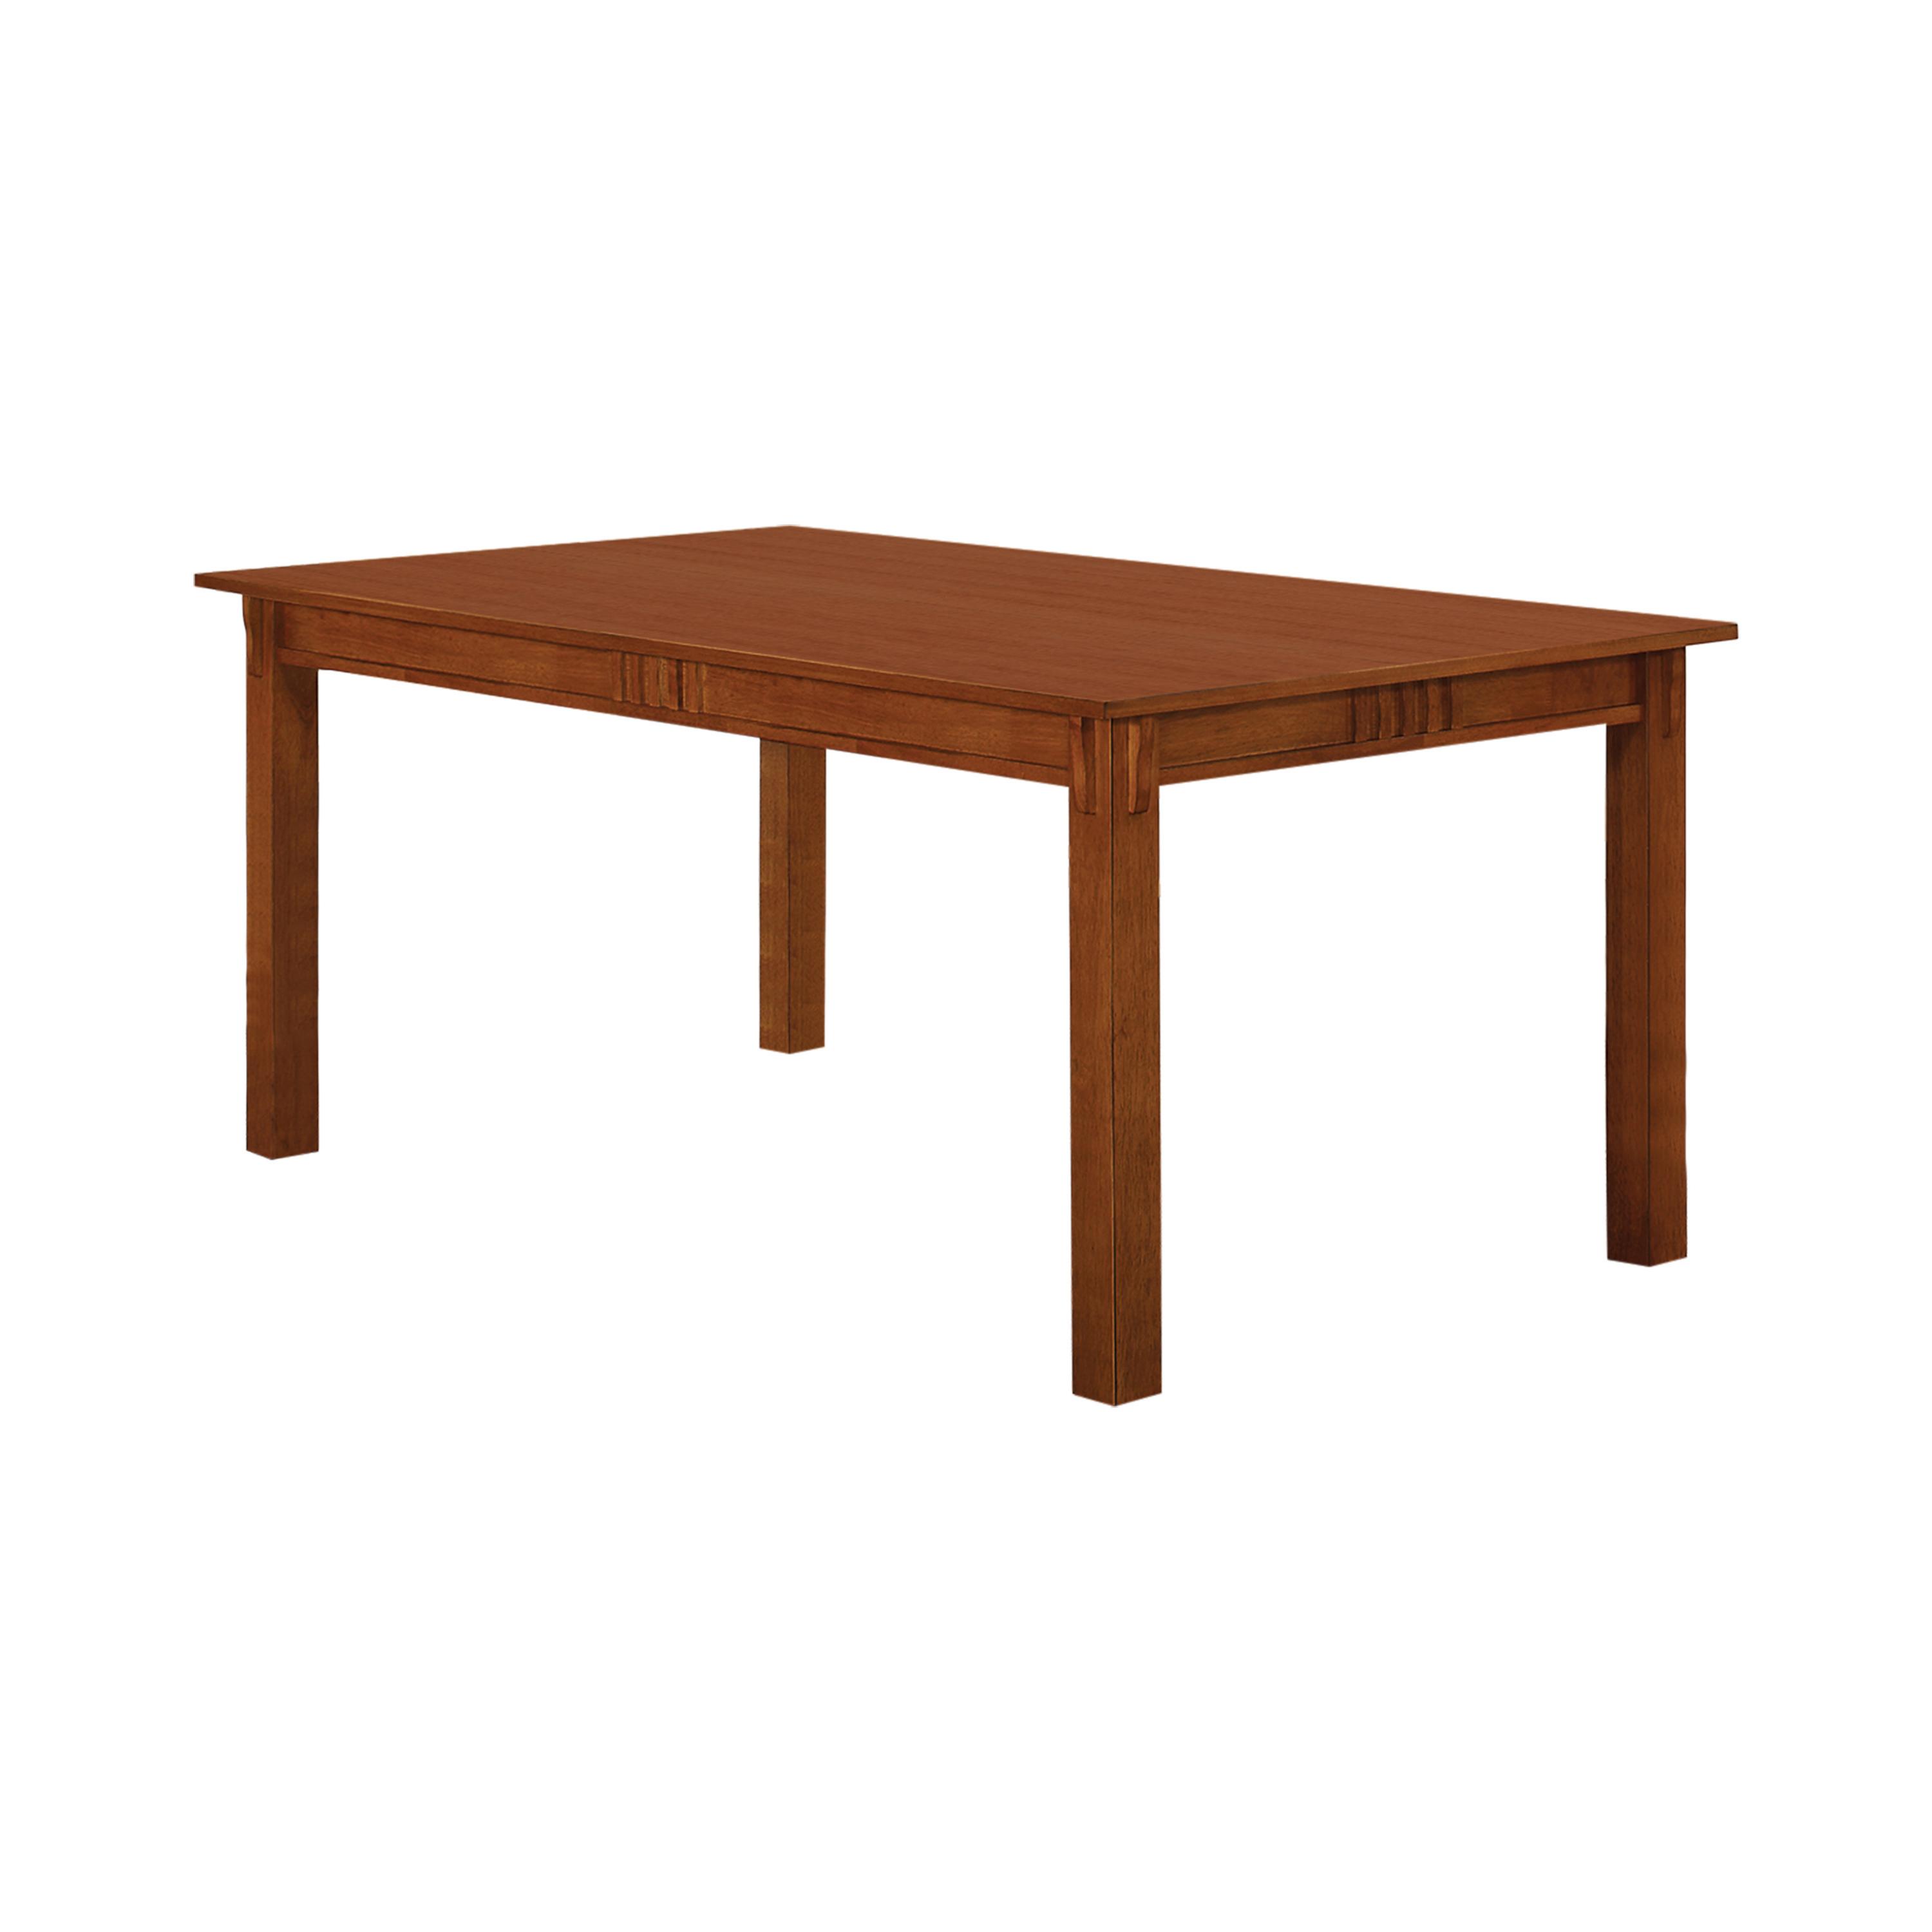 Transitional Dining Table 100621 Marbrisa 100621 in Brown 